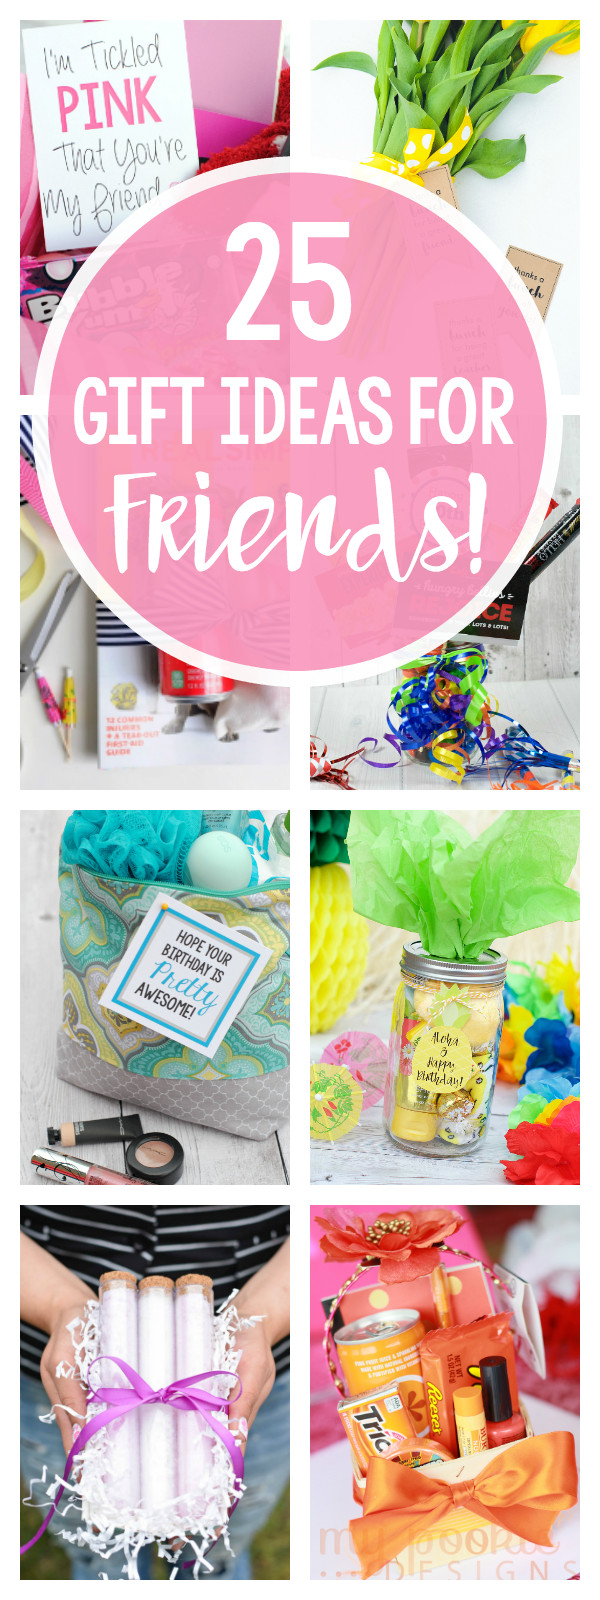 Friend Thank You Gift Ideas
 25 Fun Gifts for Best Friends for Any Occasion – Fun Squared